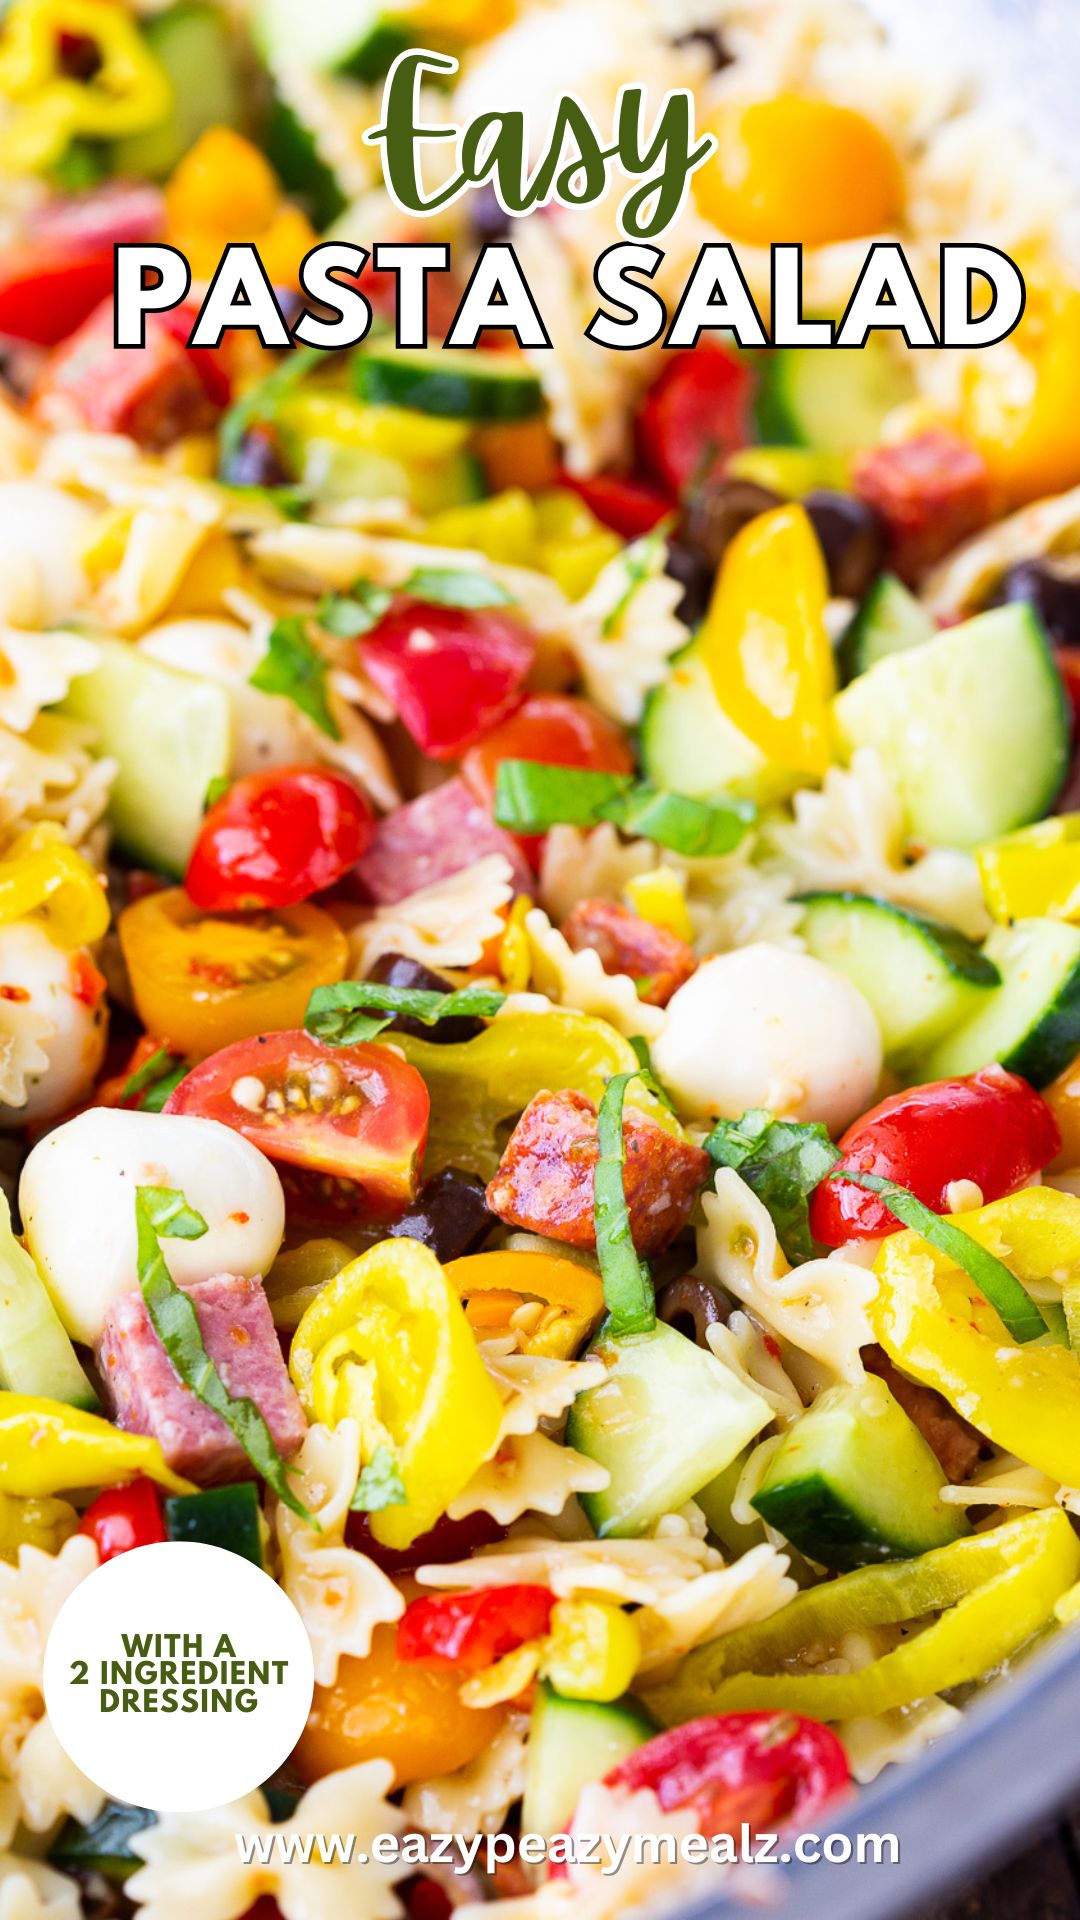 Easy Pasta Salad is loaded with crunch, color, and flavor, and is so easy to make with a simple 2 ingredient dressing. This will be your go to potluck item all summer long. 